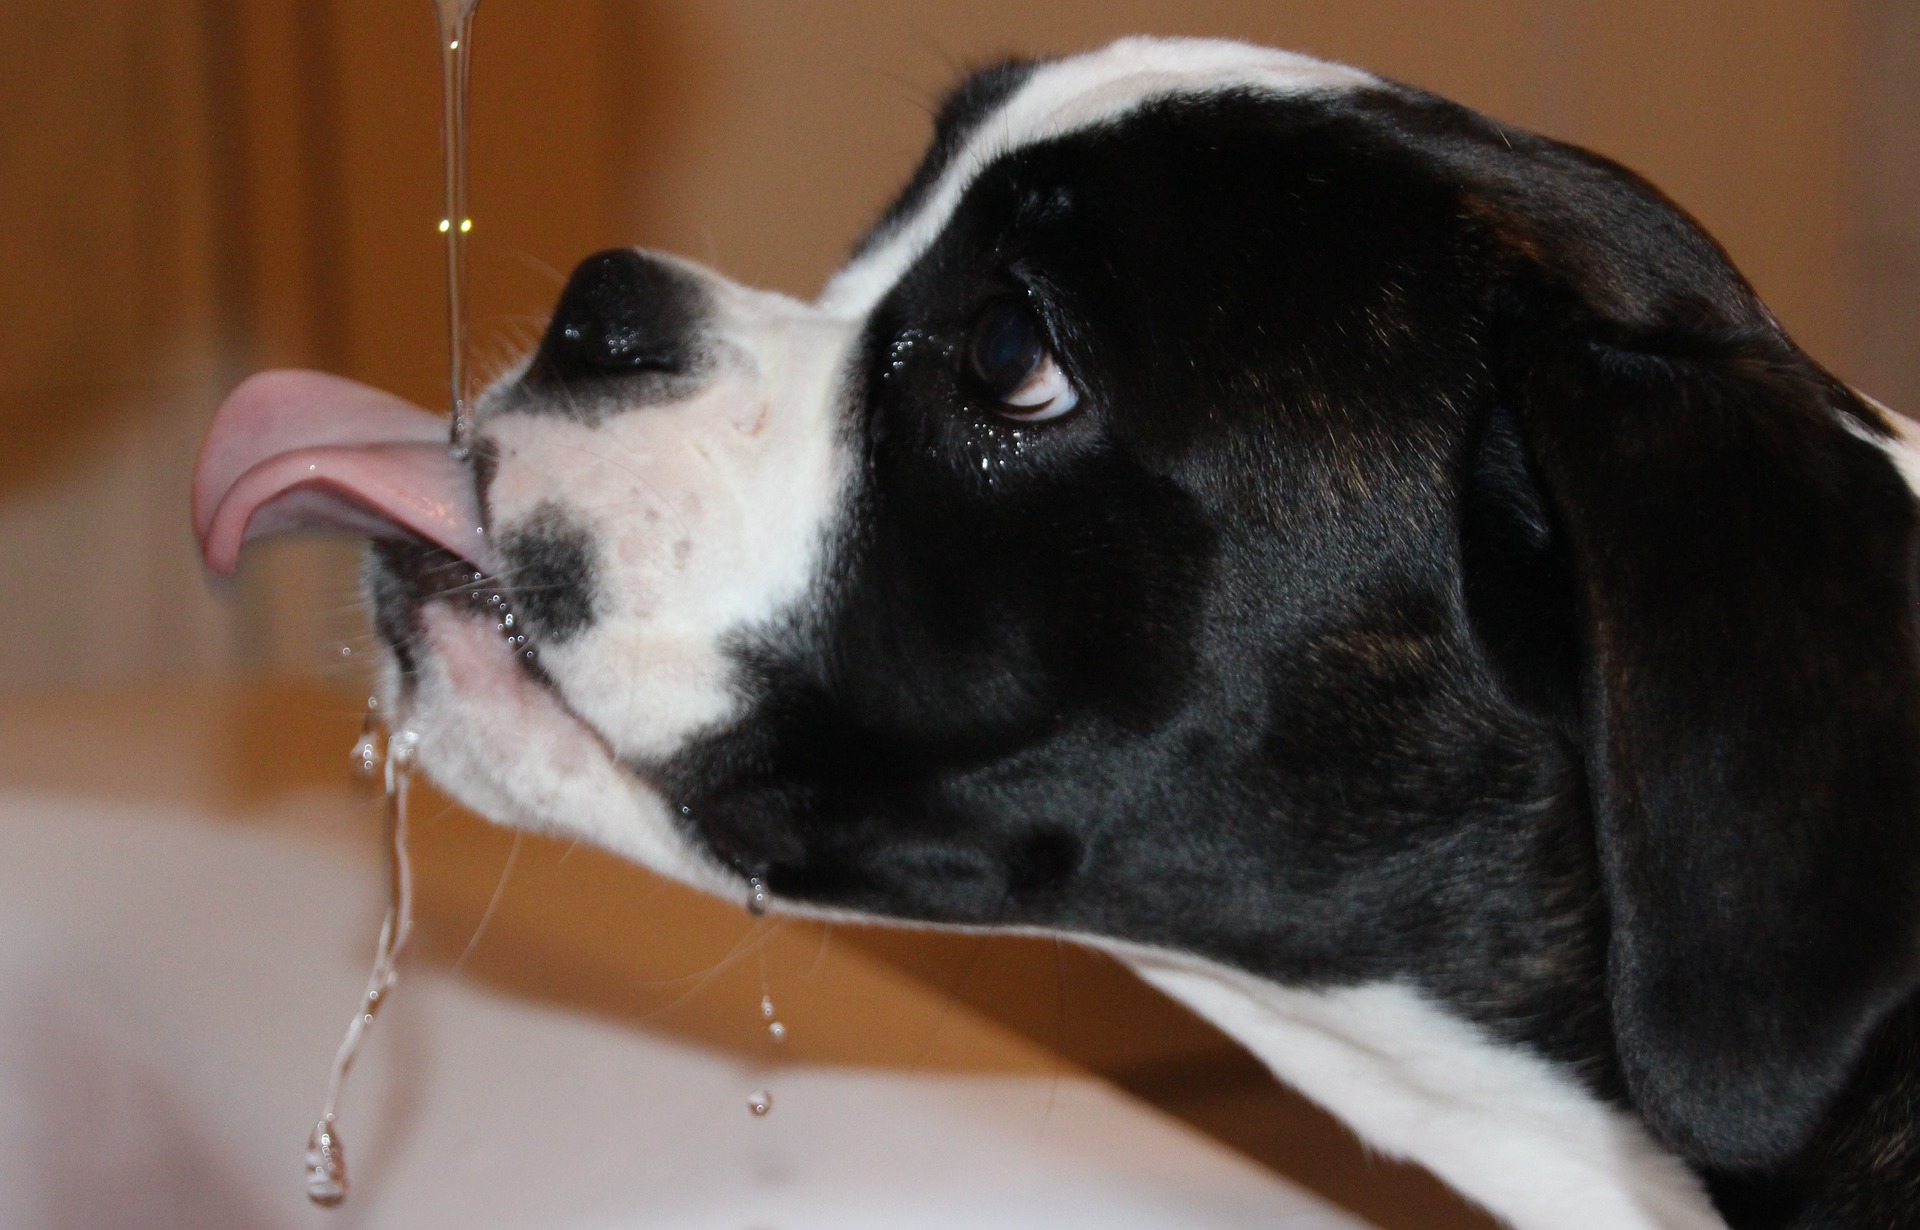 Dog Water Intake Calculator | How Much Water Should a Dog Drink?